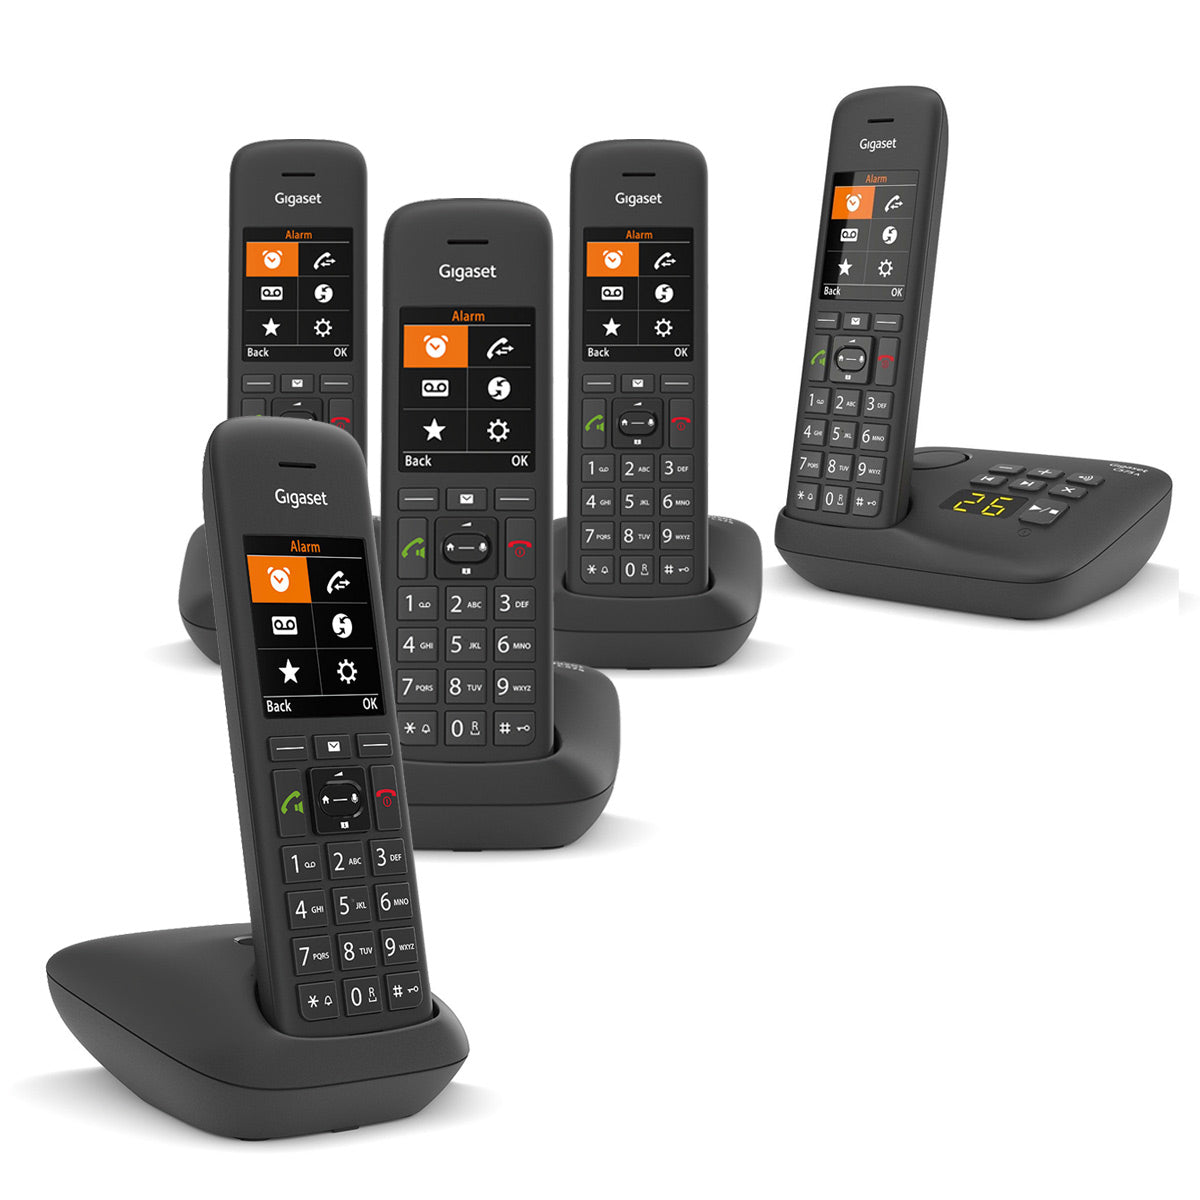 Gigaset Premium C575A Cordless Phone, Five Handsets with Answer Machine